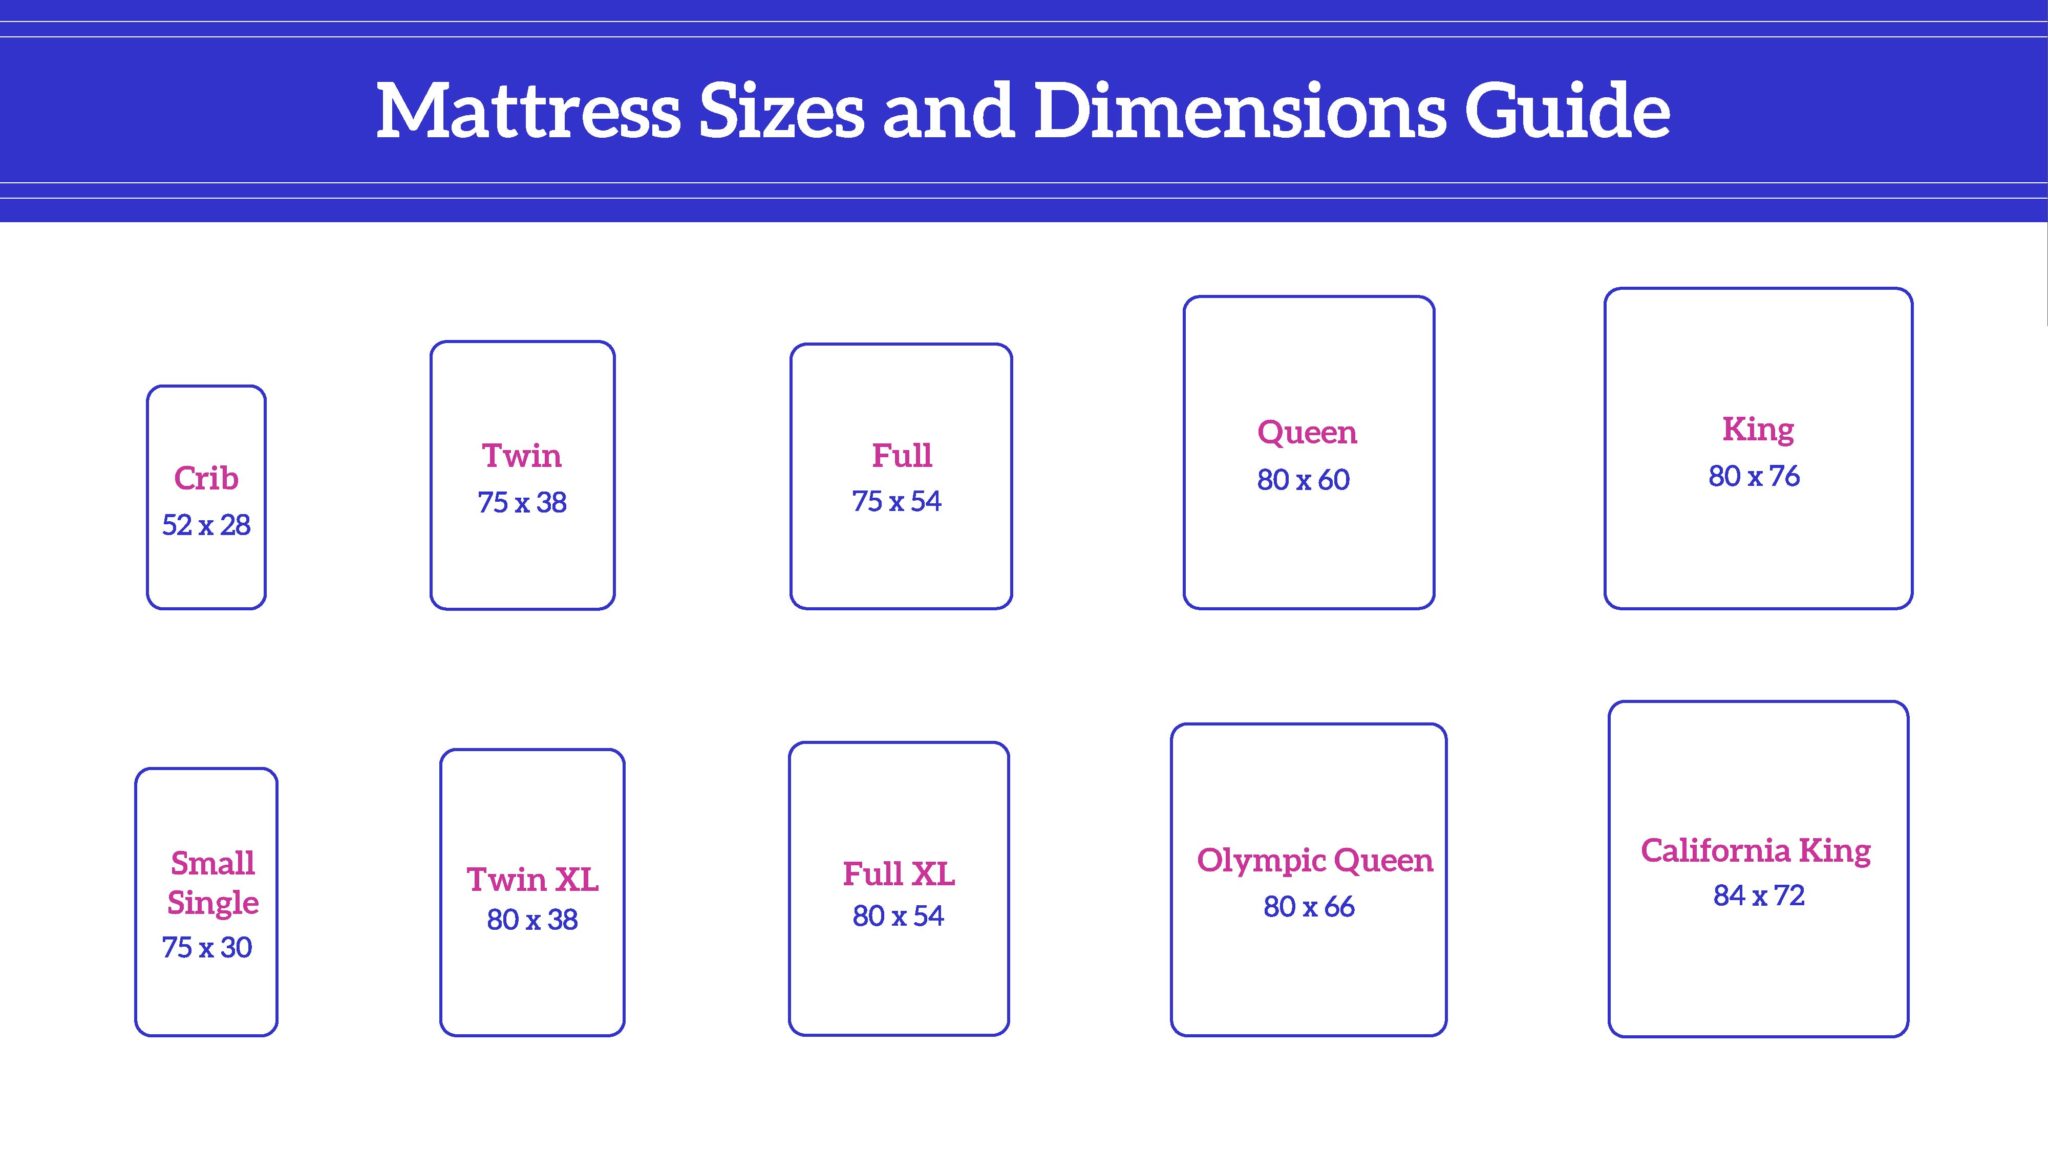 Mattress Sizes and Dimensions